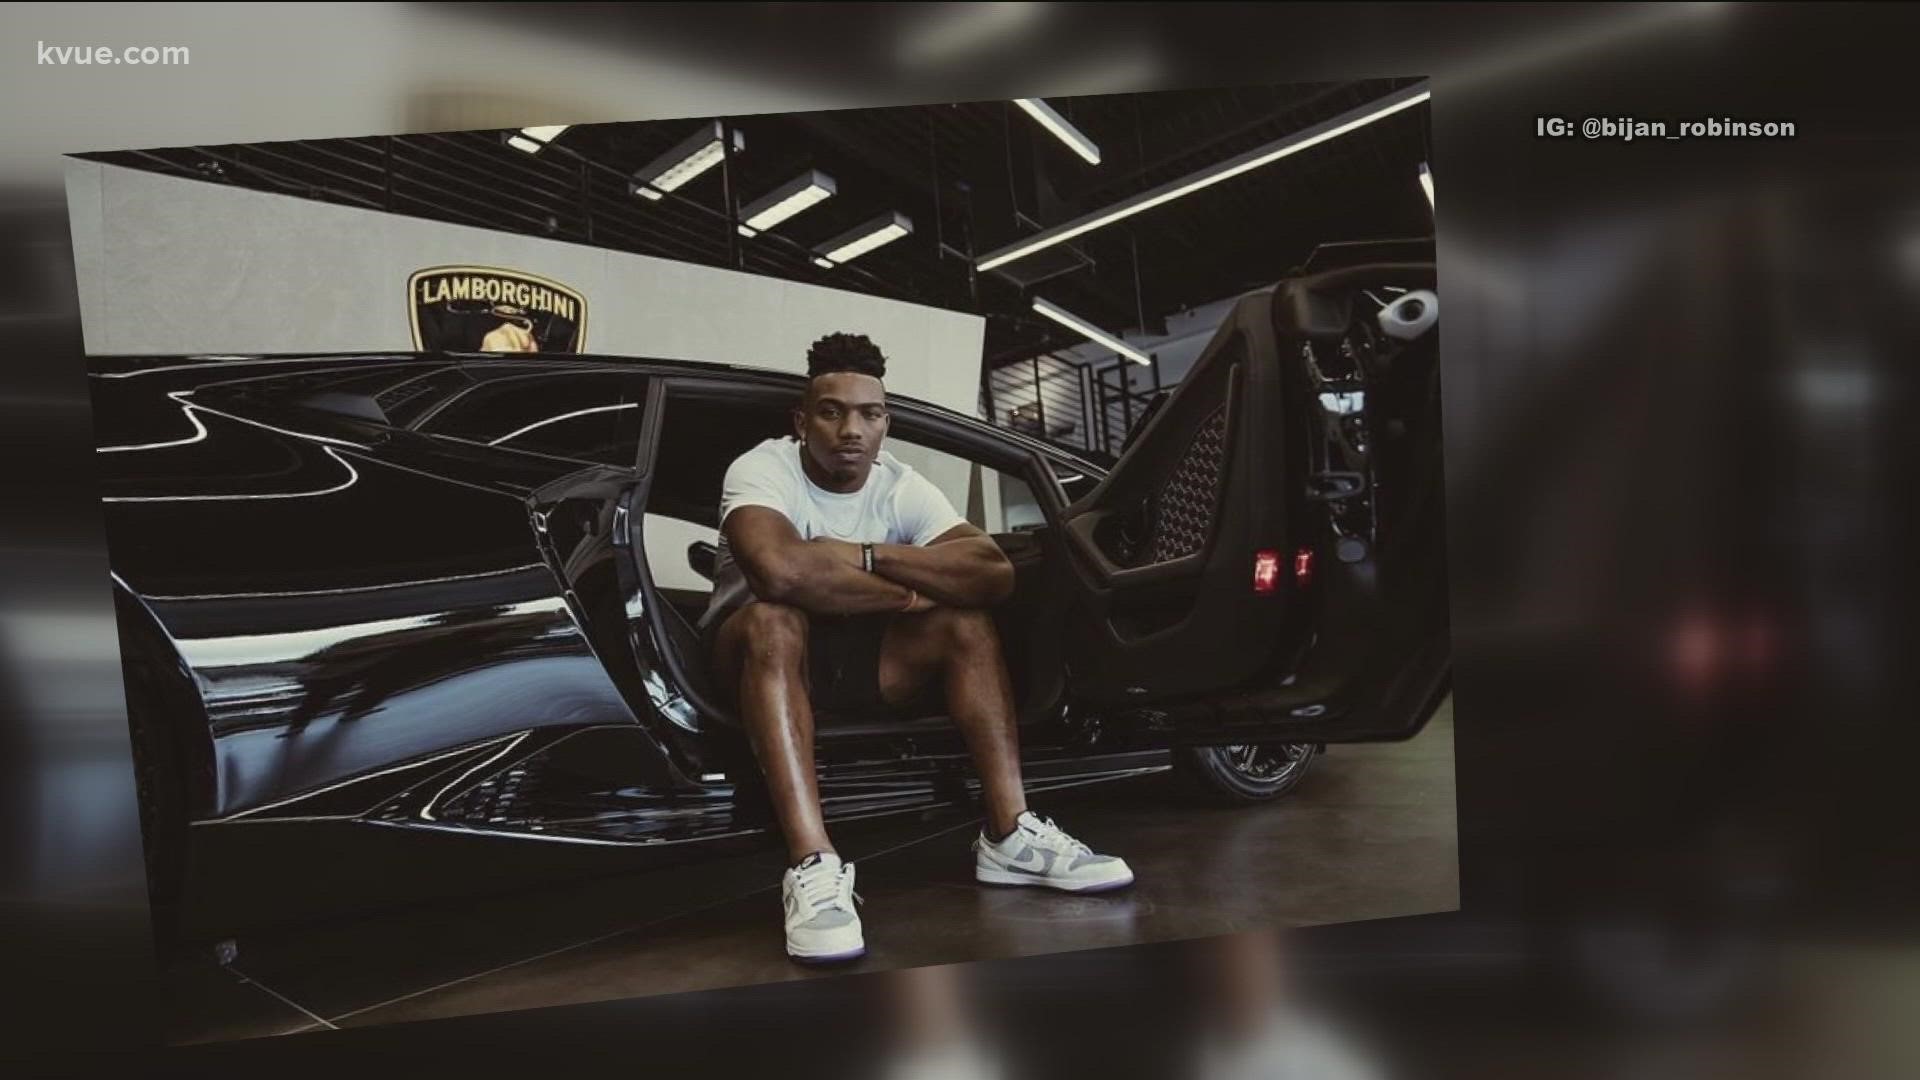 The Texas running back just agreed to a name, image and likeness deal with Lamborghini.